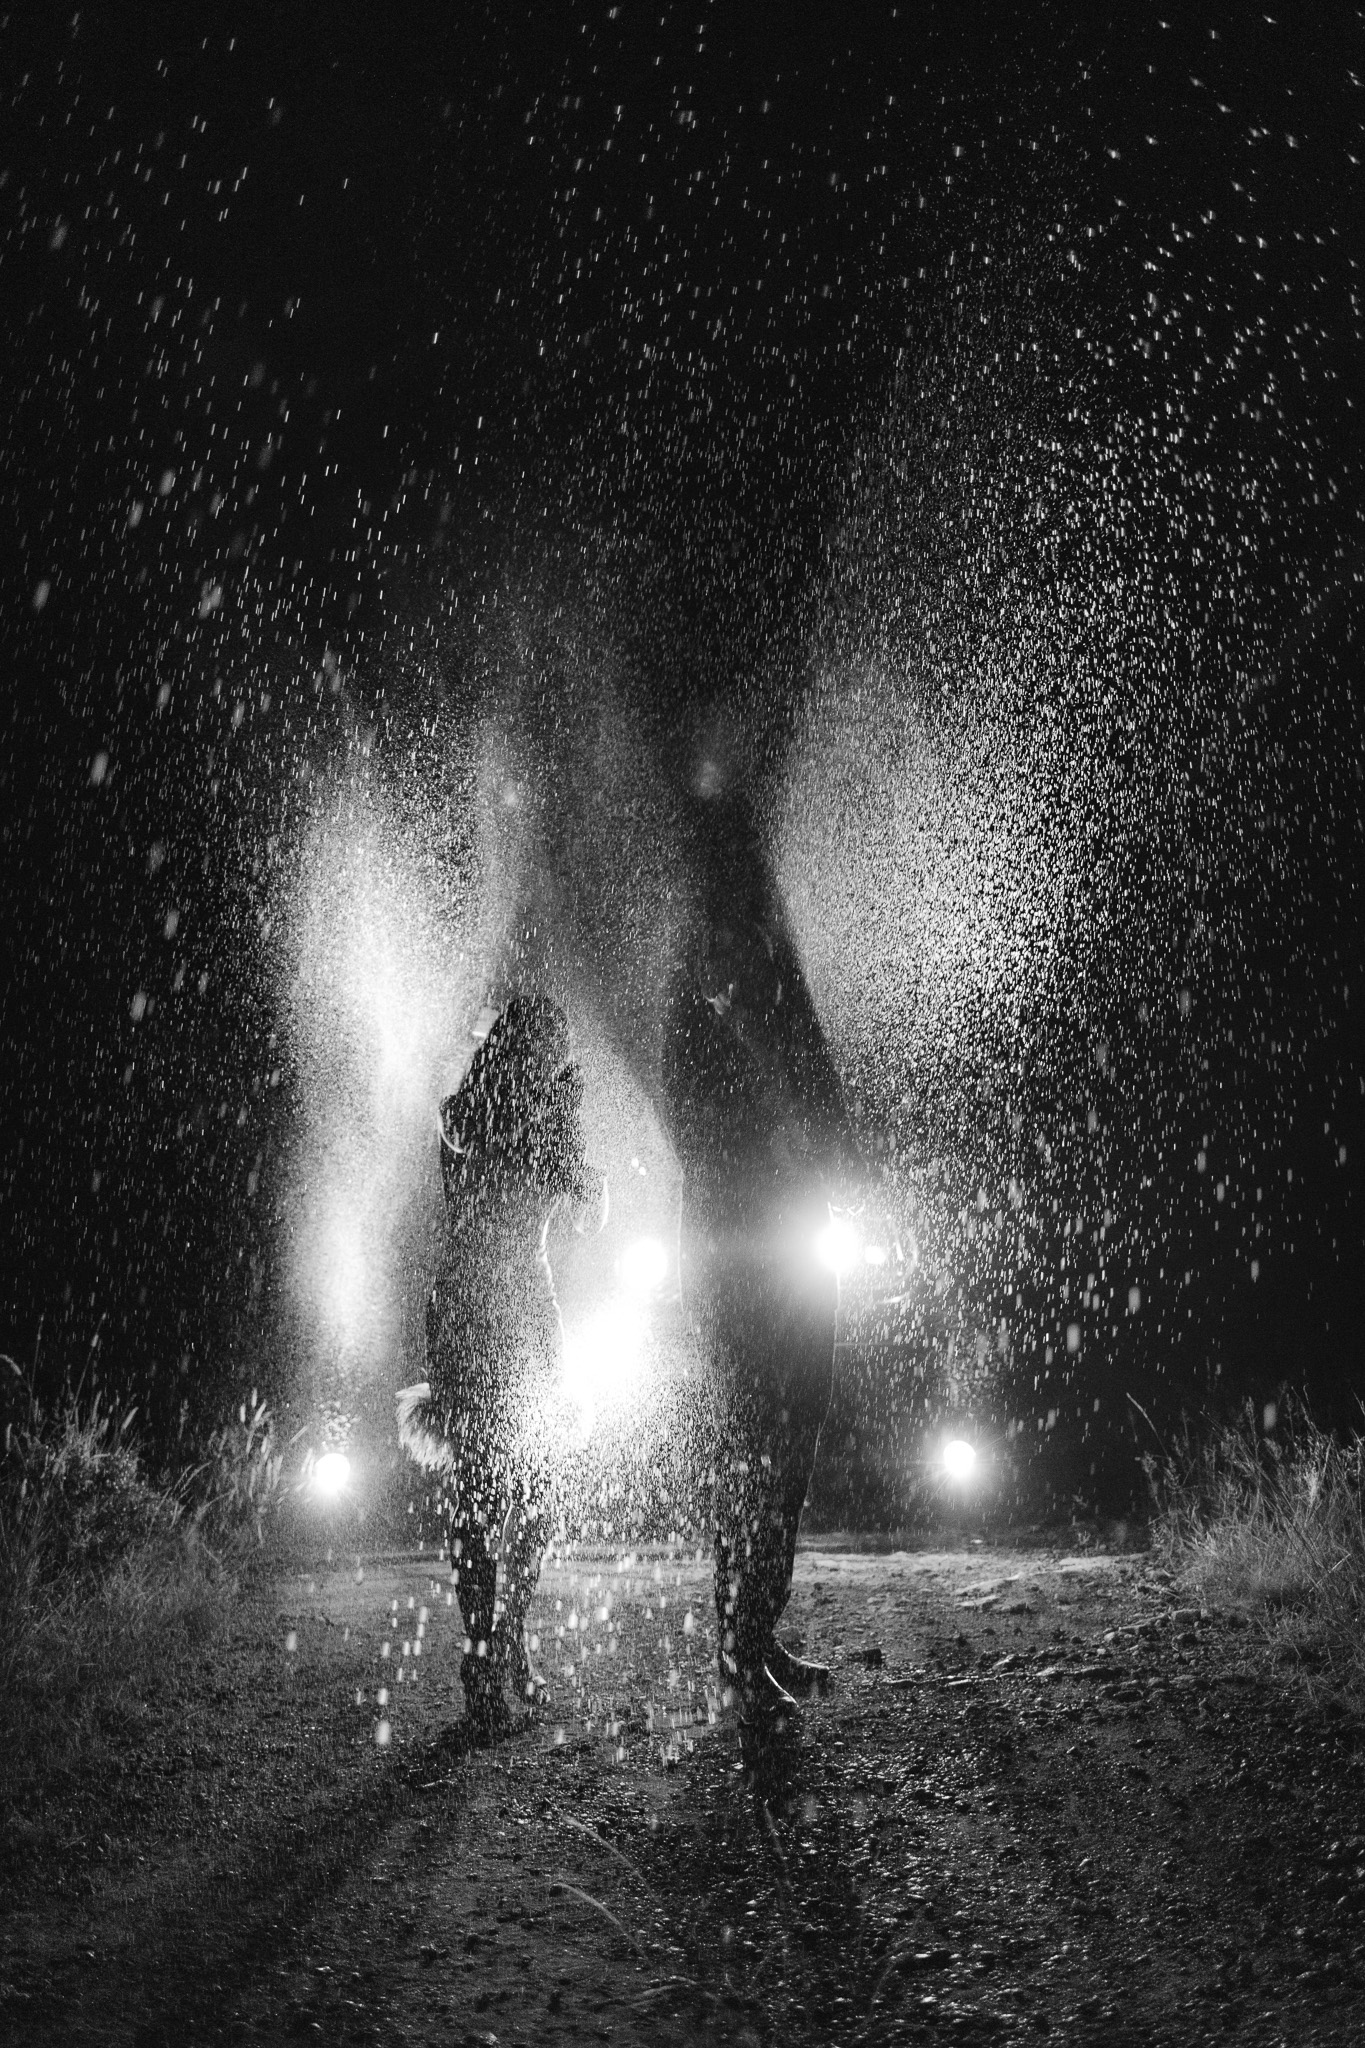 Elopement couple spraying champagne in front of the car's headlights creating the light to reflect off of the champagne droplets 